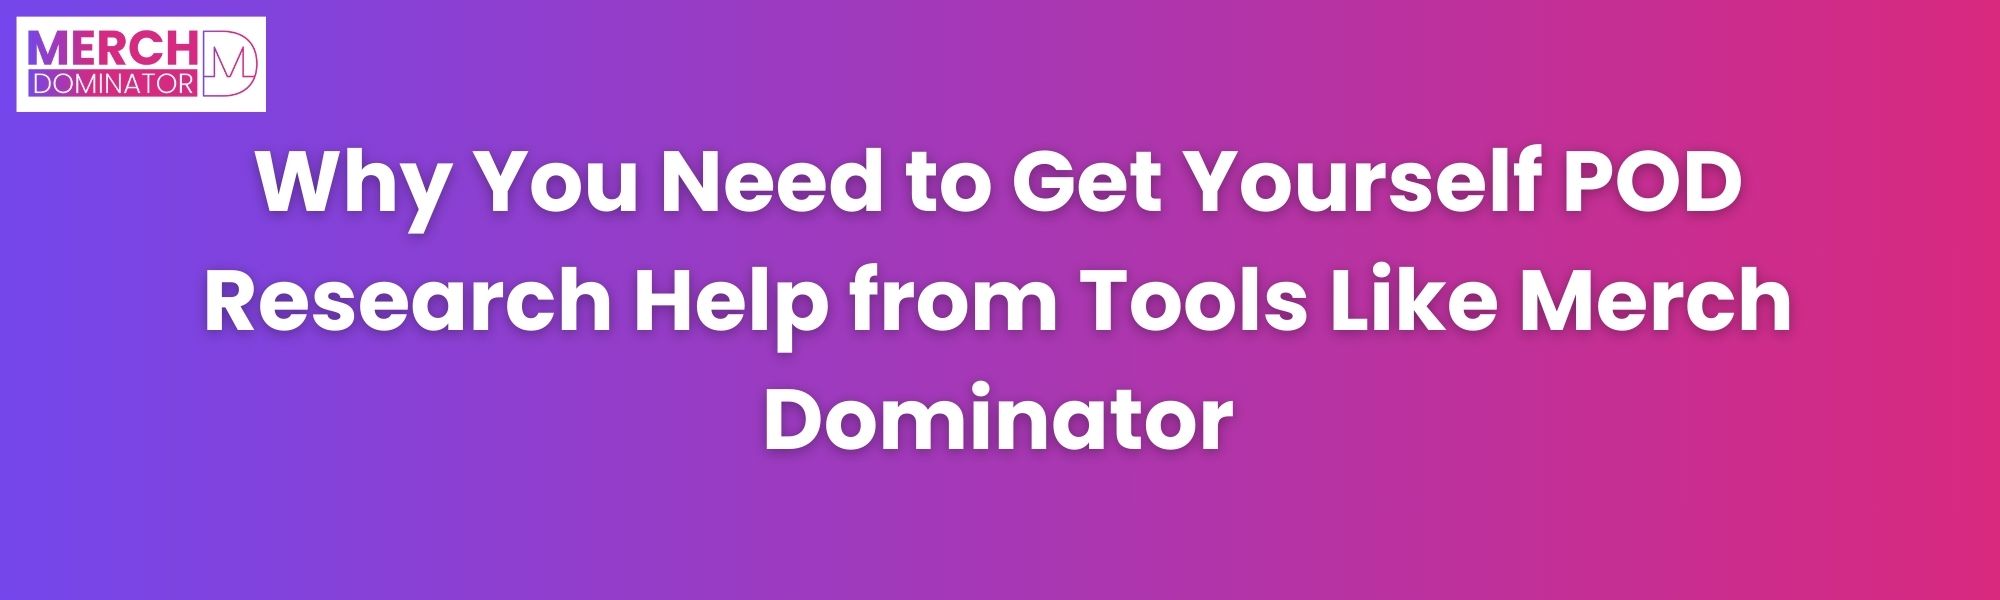 Why Do You Need POD Research Help from Tools Like Merch Dominator